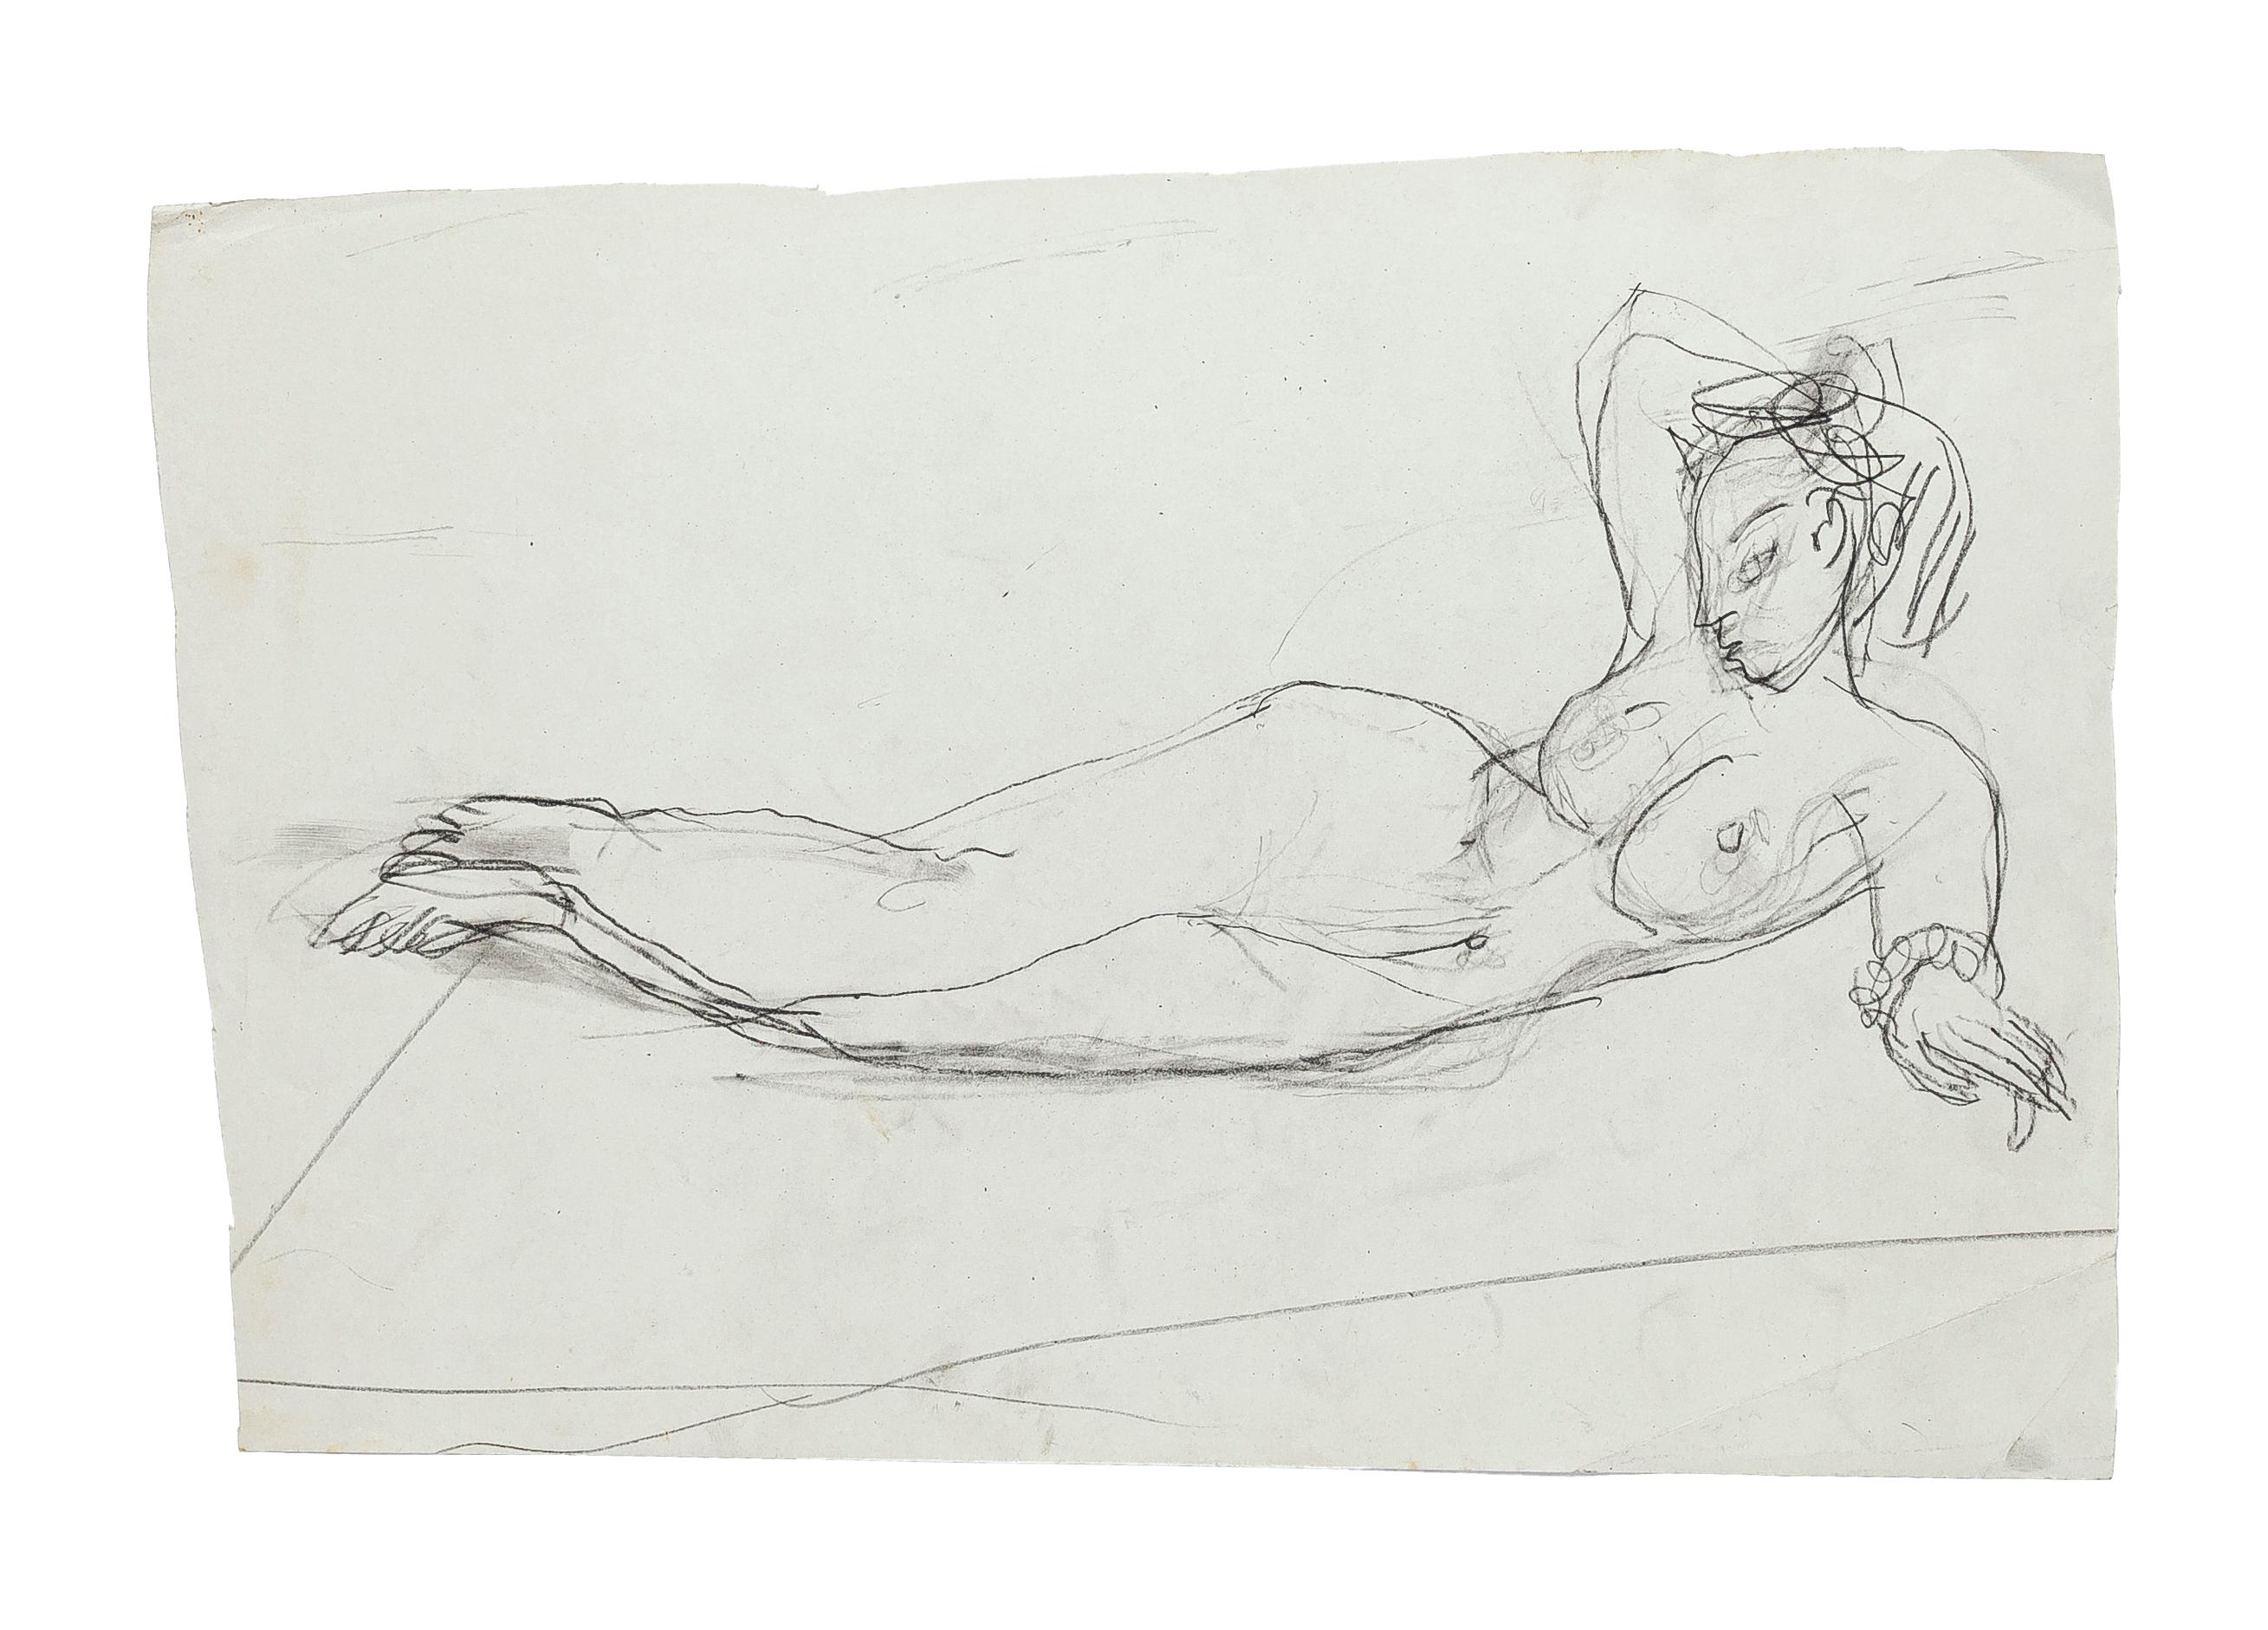 Lying Nude - Original Pencil Drawing by Jeanne Daour - 1950s